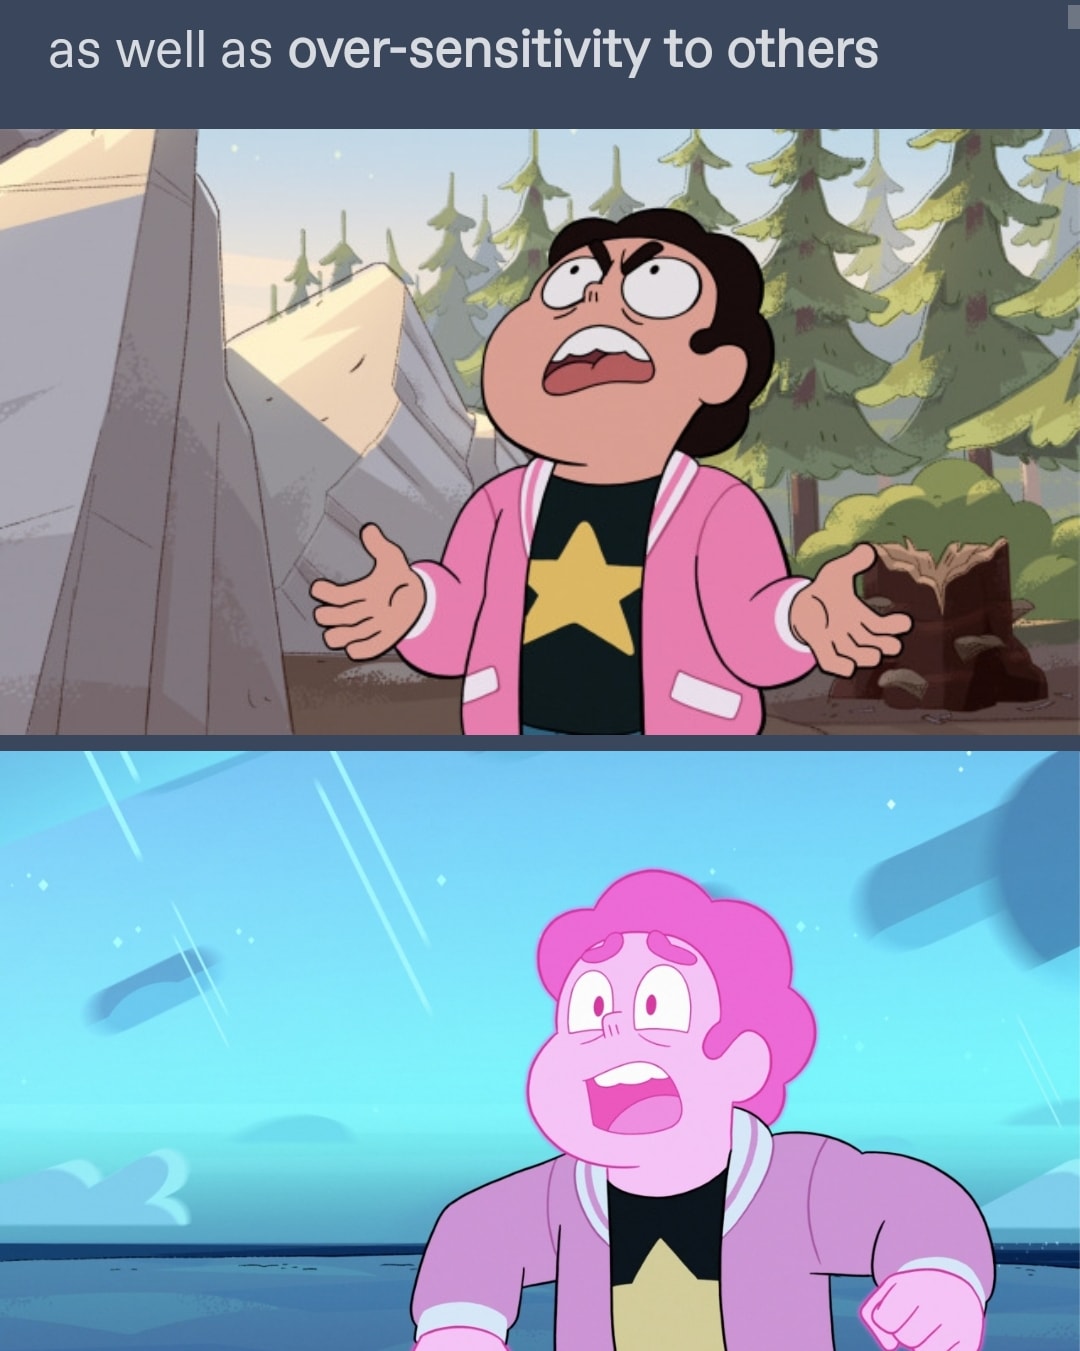 Steven Universe and The Atlas Personality